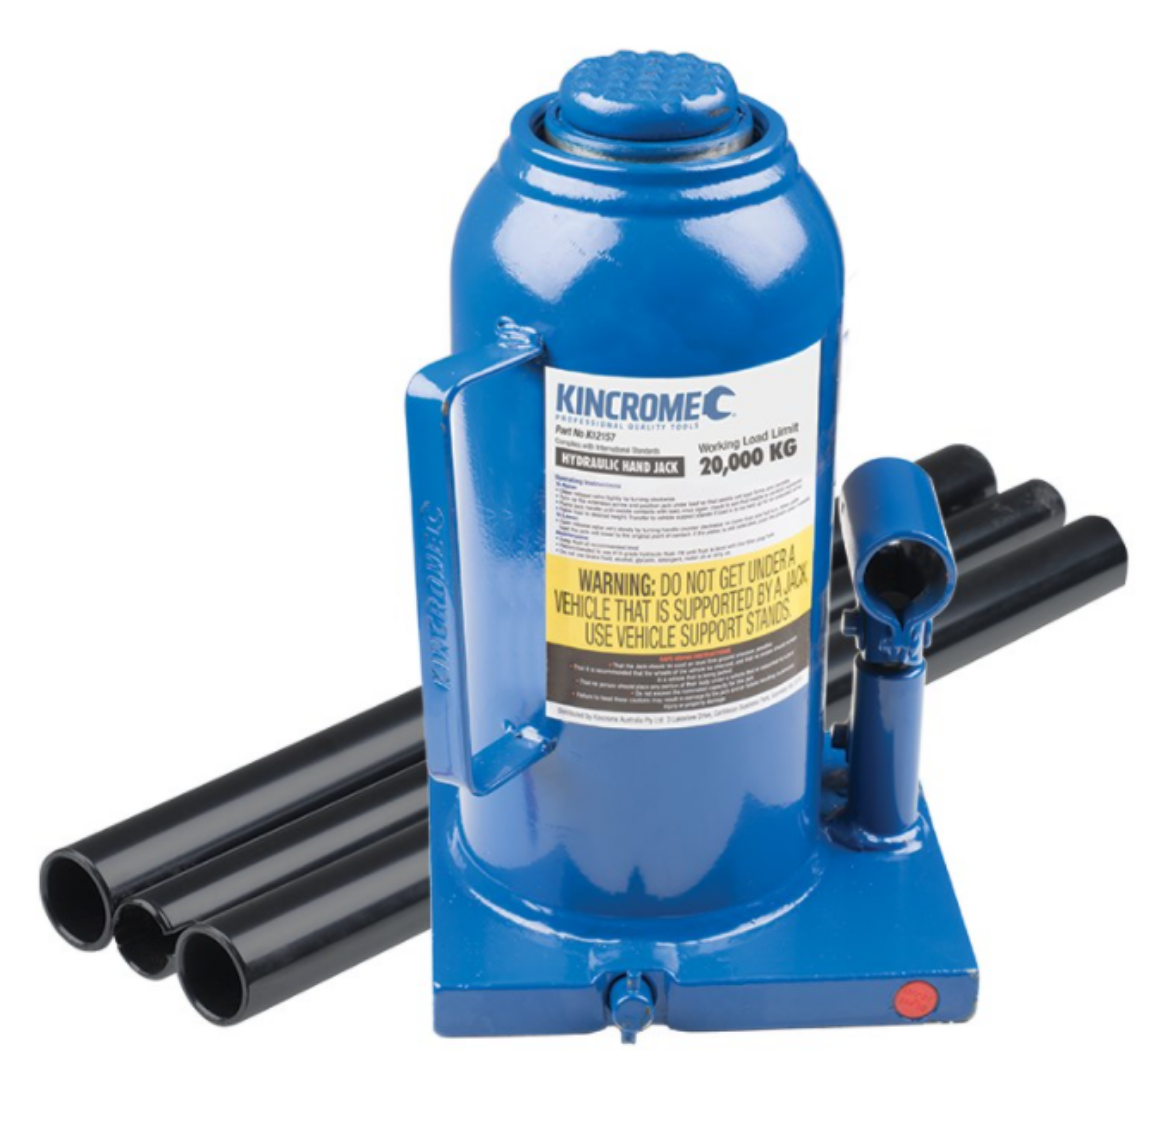 Picture of KINCROME BOTTLE JACK HYDRAULIC 20,000KG